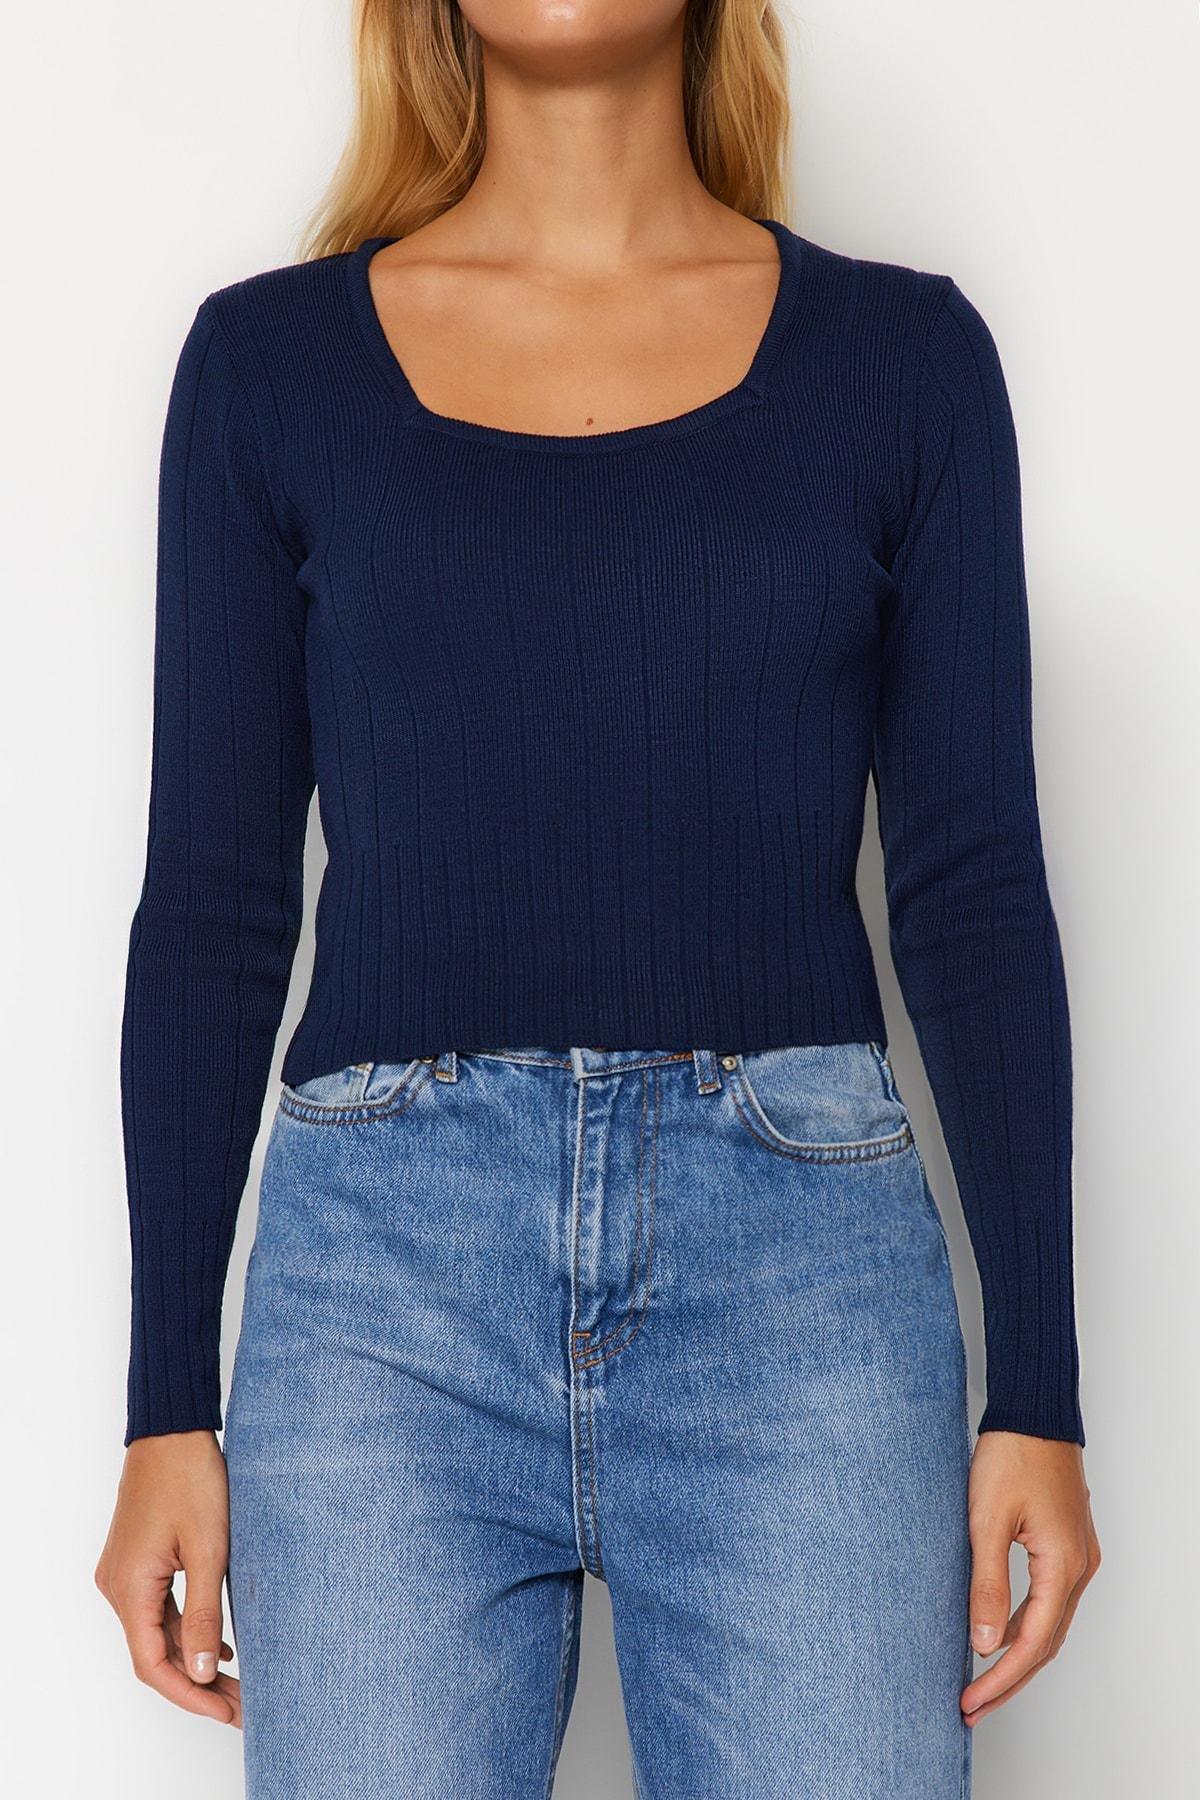 Trendyol - Navy Cropped Knitted Sweater